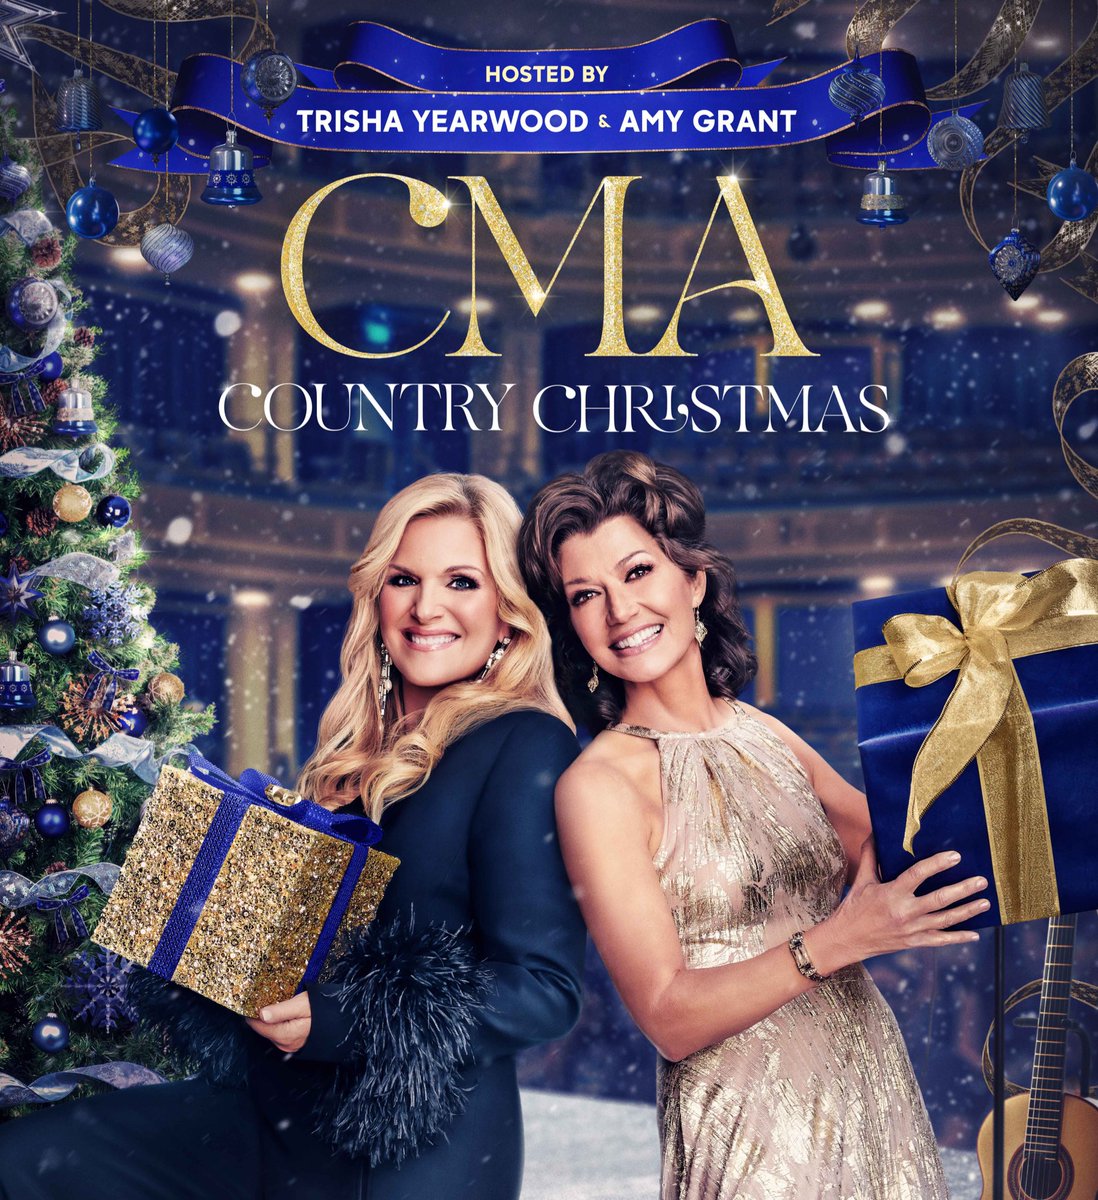 It’s beginning to look like CMA Country Christmas!🎄Catch us on Dec. 14th on @abcnetwork! #CMAChristmas